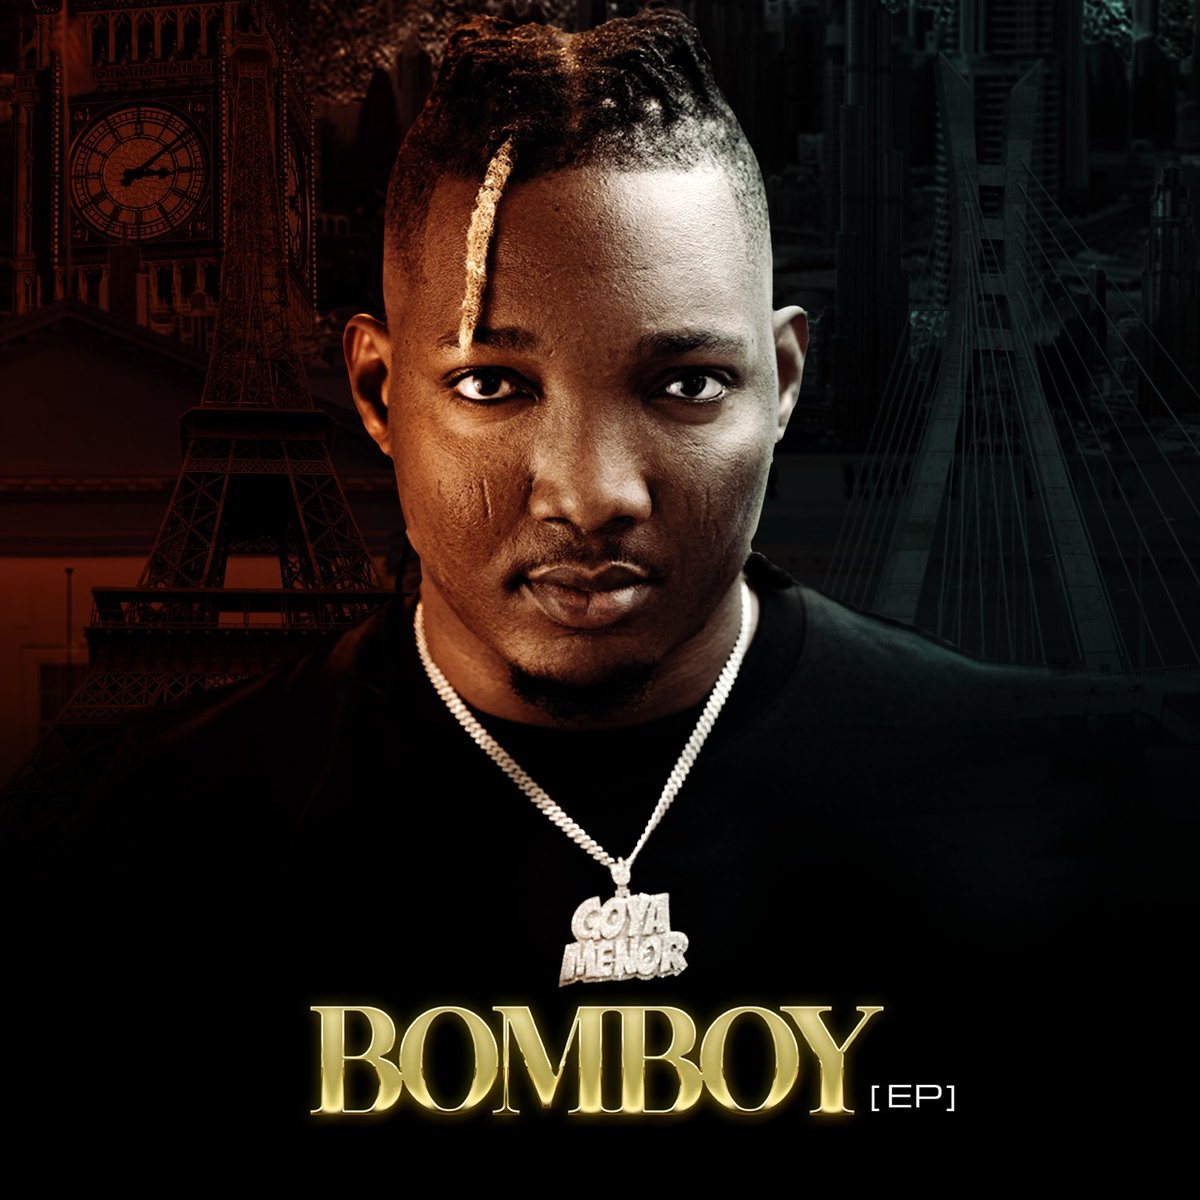 BOMBOY Now Out!!! Be the first to listen ✌️❤️✌️ fanlink.to/iTqP